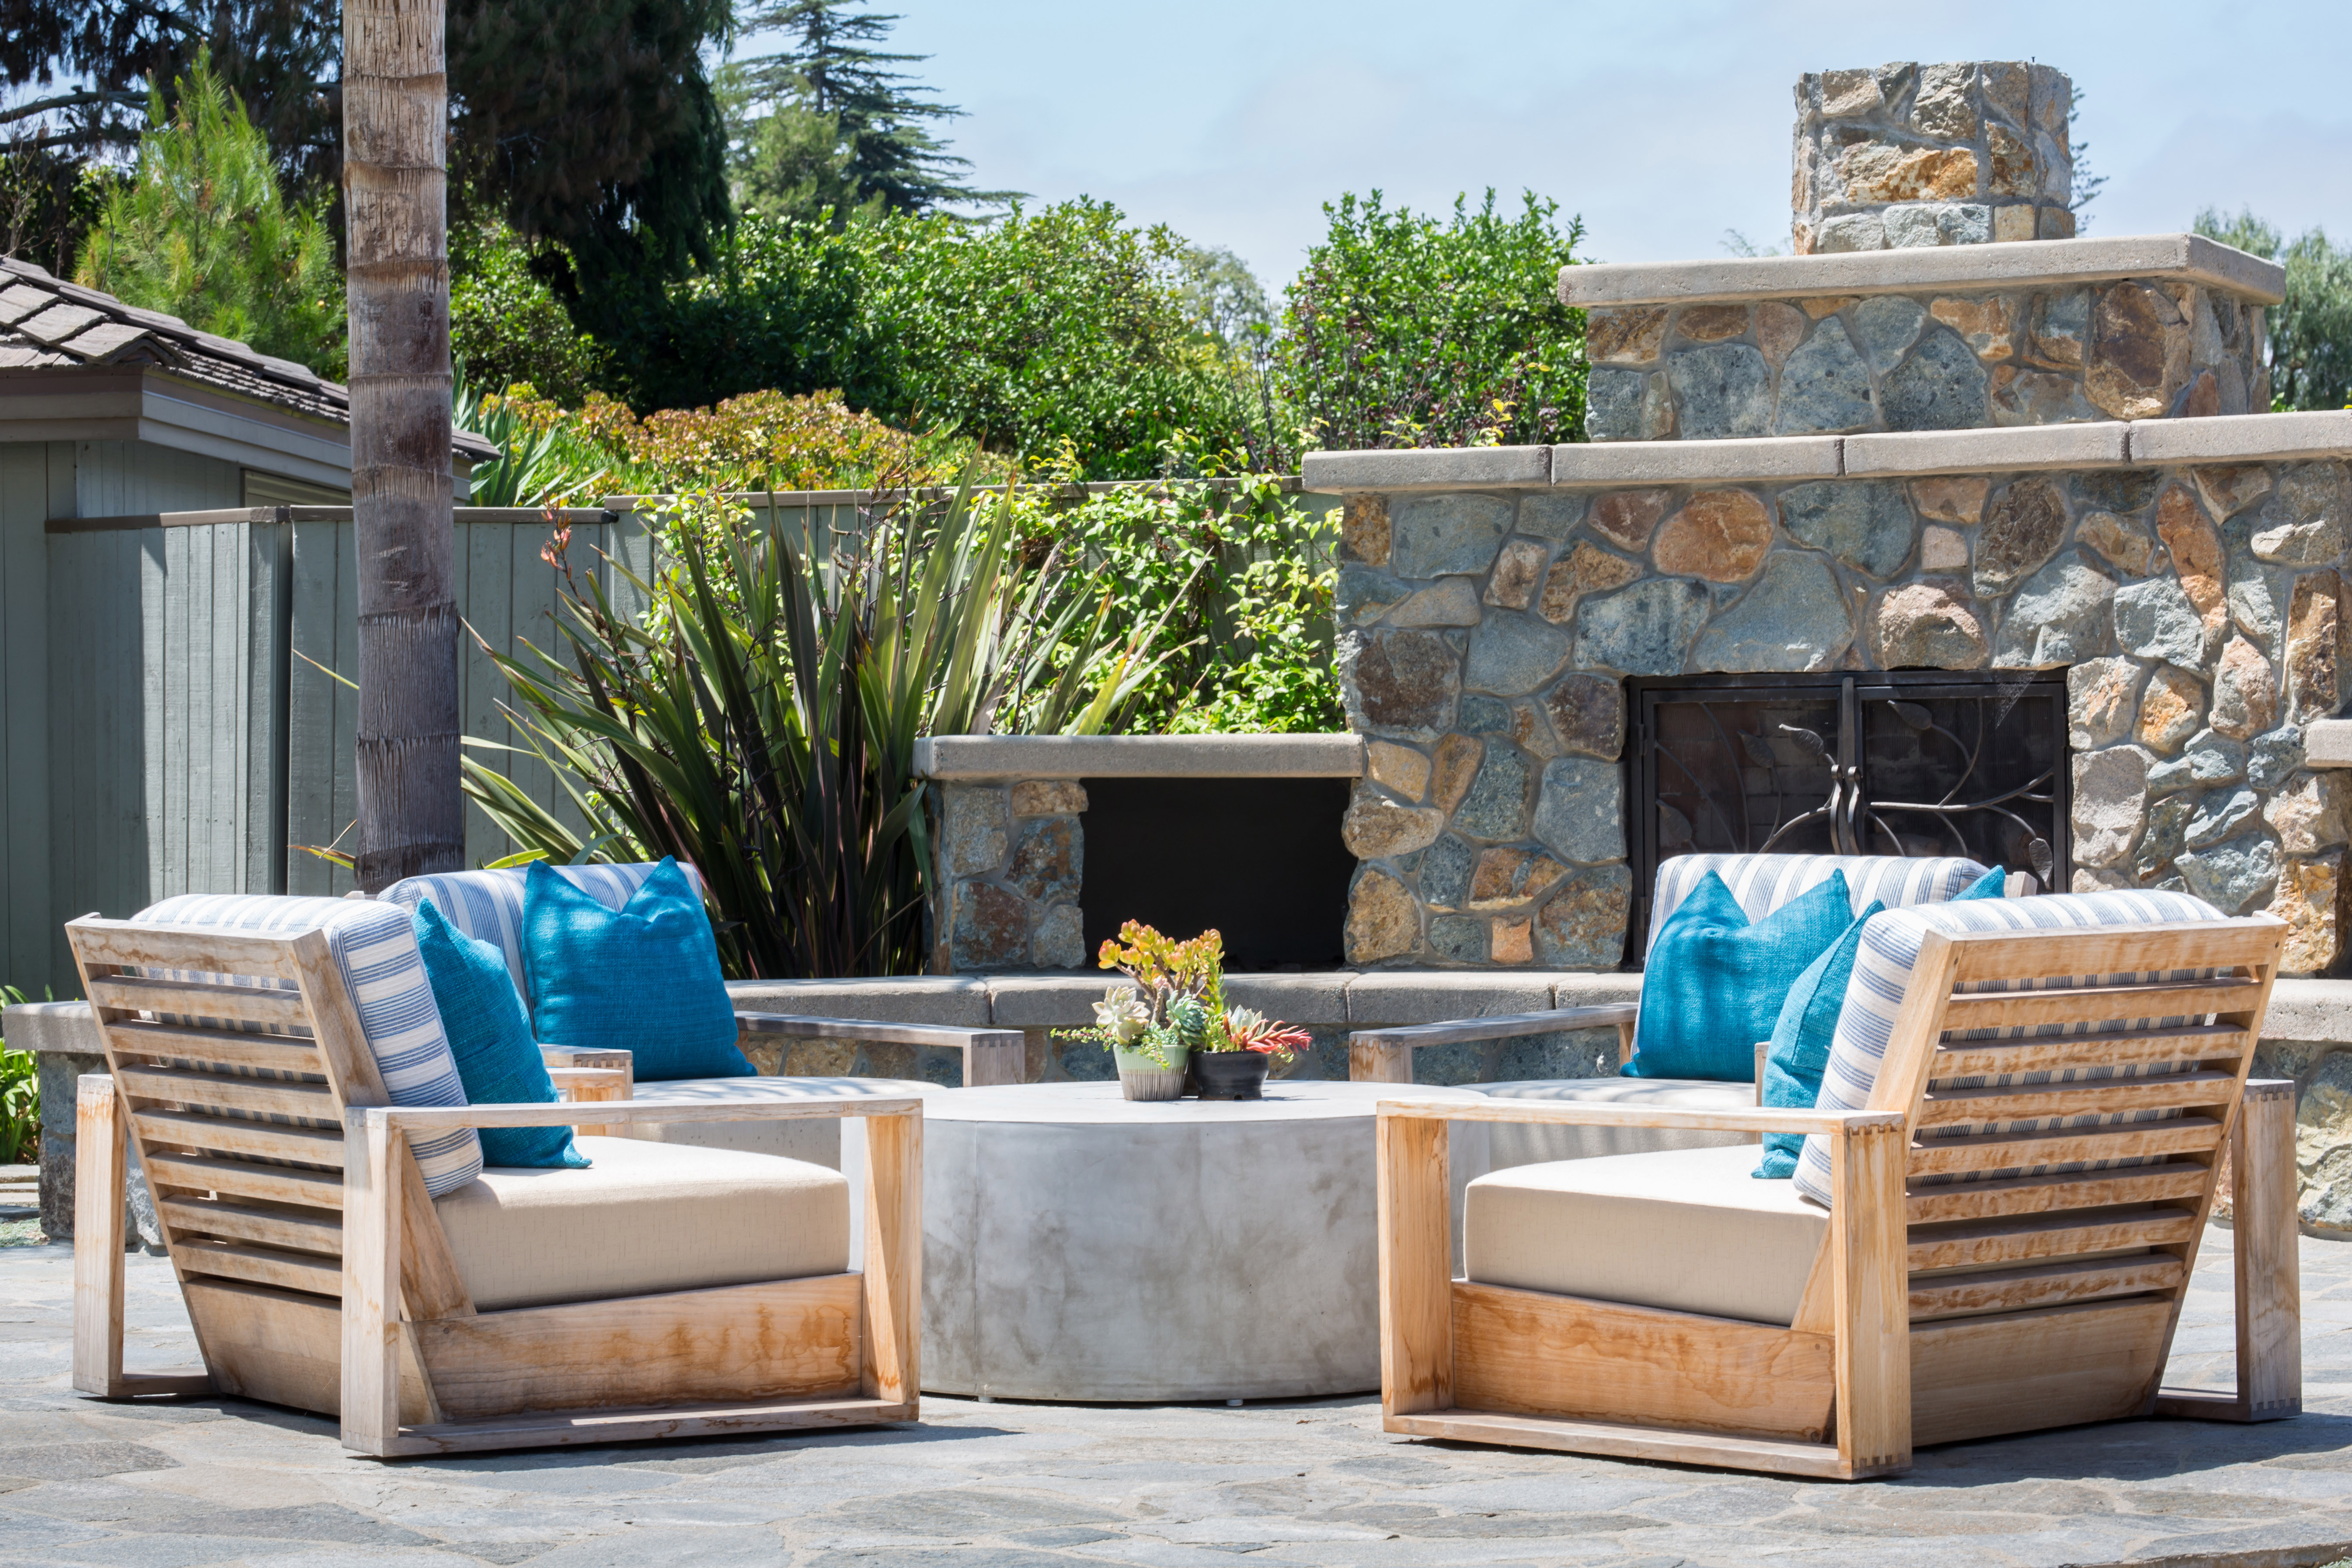 Fire pits help transition from day to night so you can keep the party going strong!